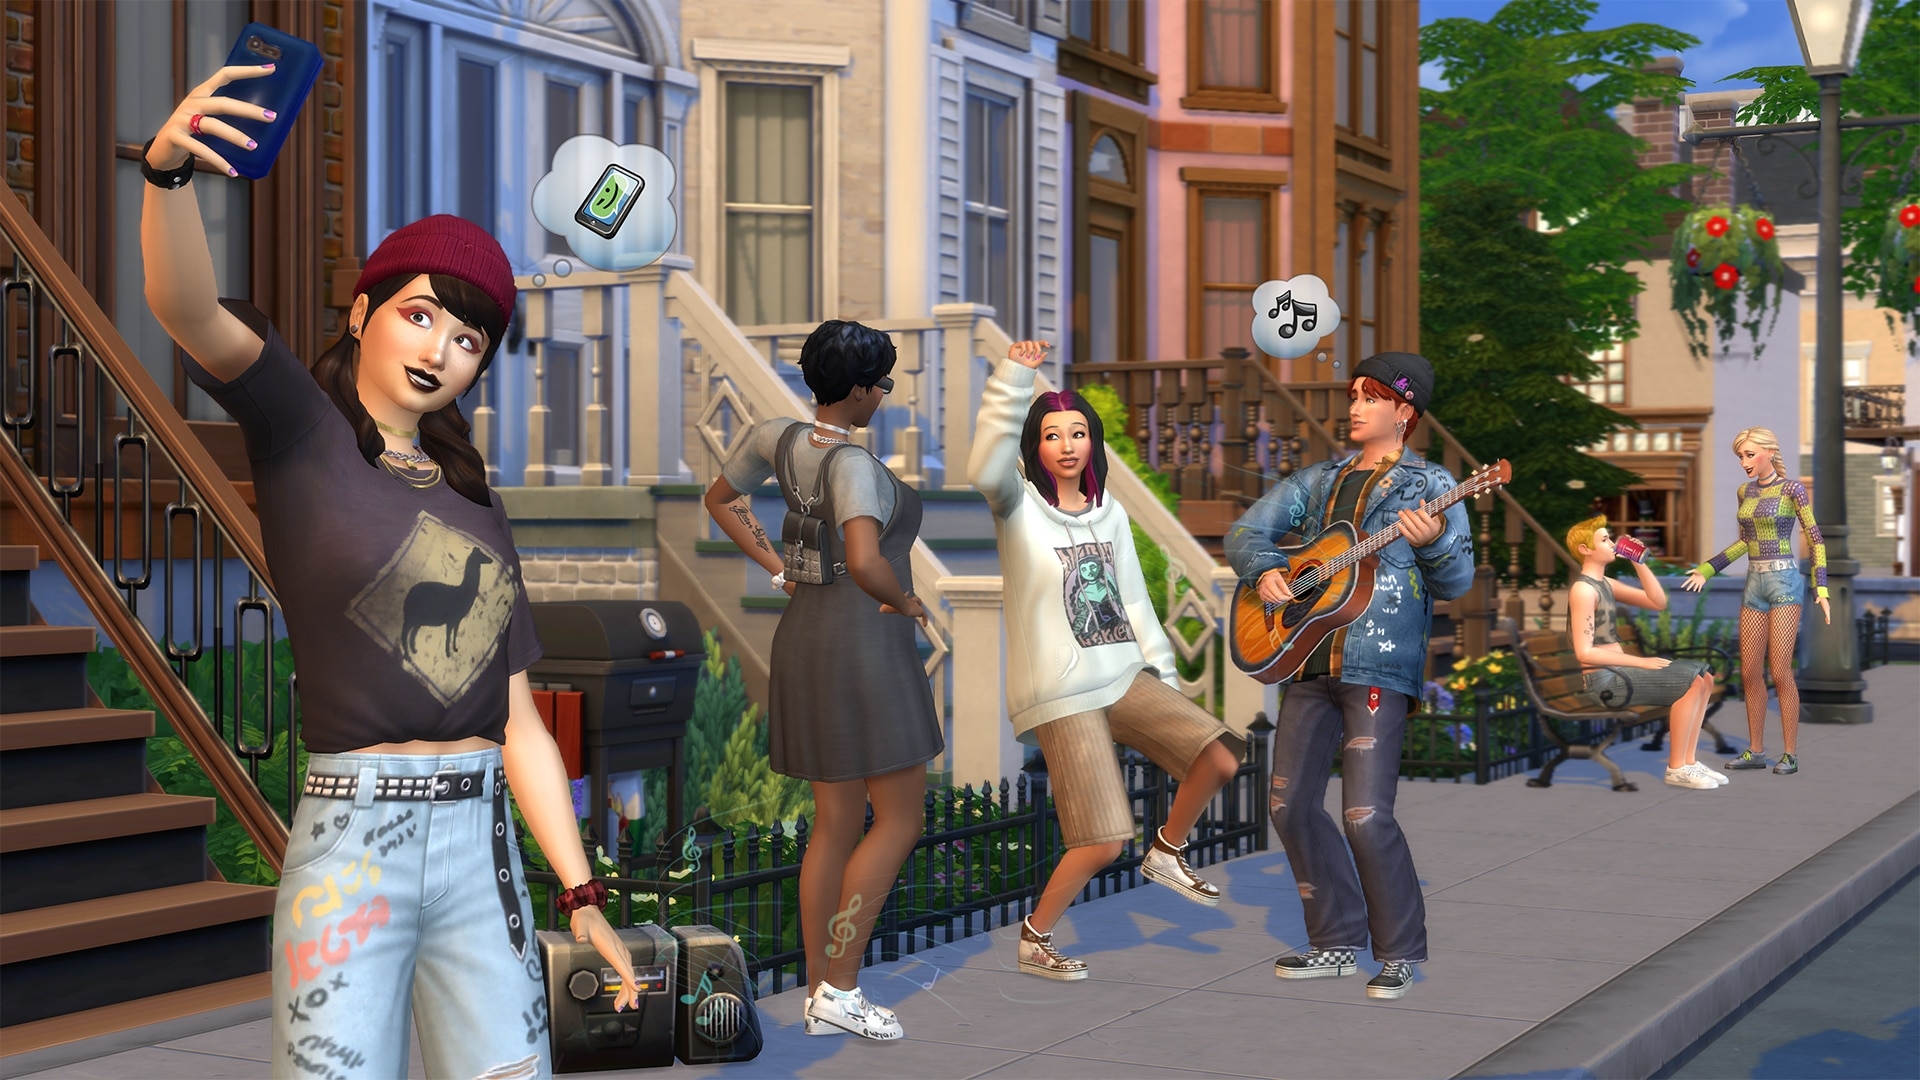 It looks like The Sims 5 will be a free-to-play game